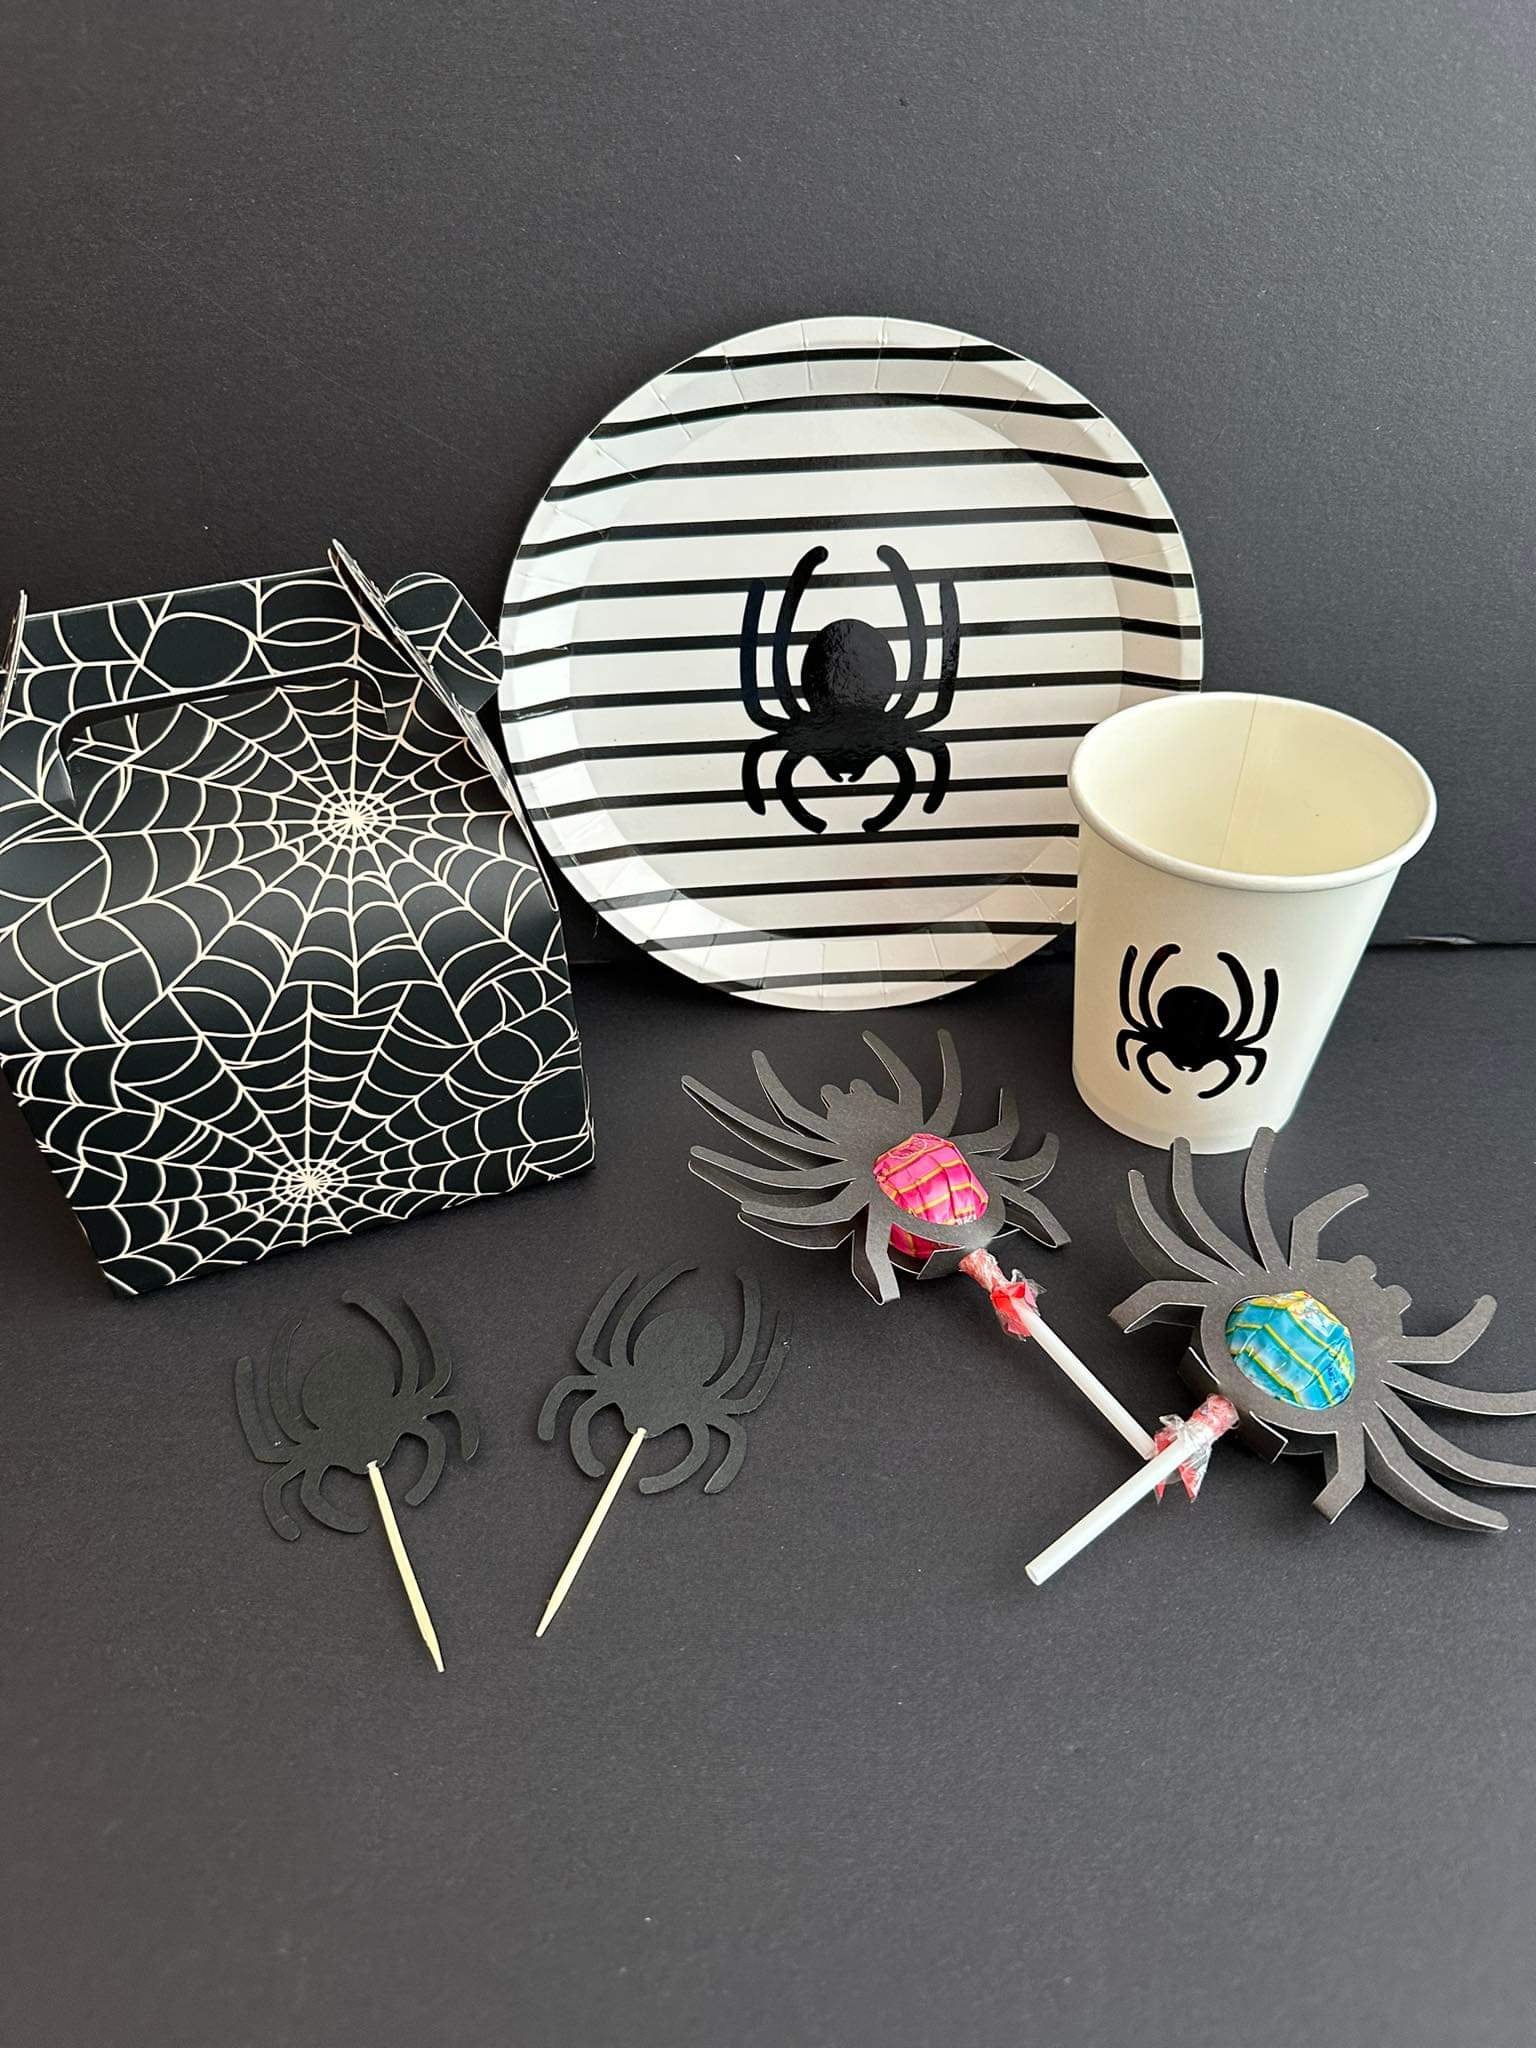 Spider themed party supplies